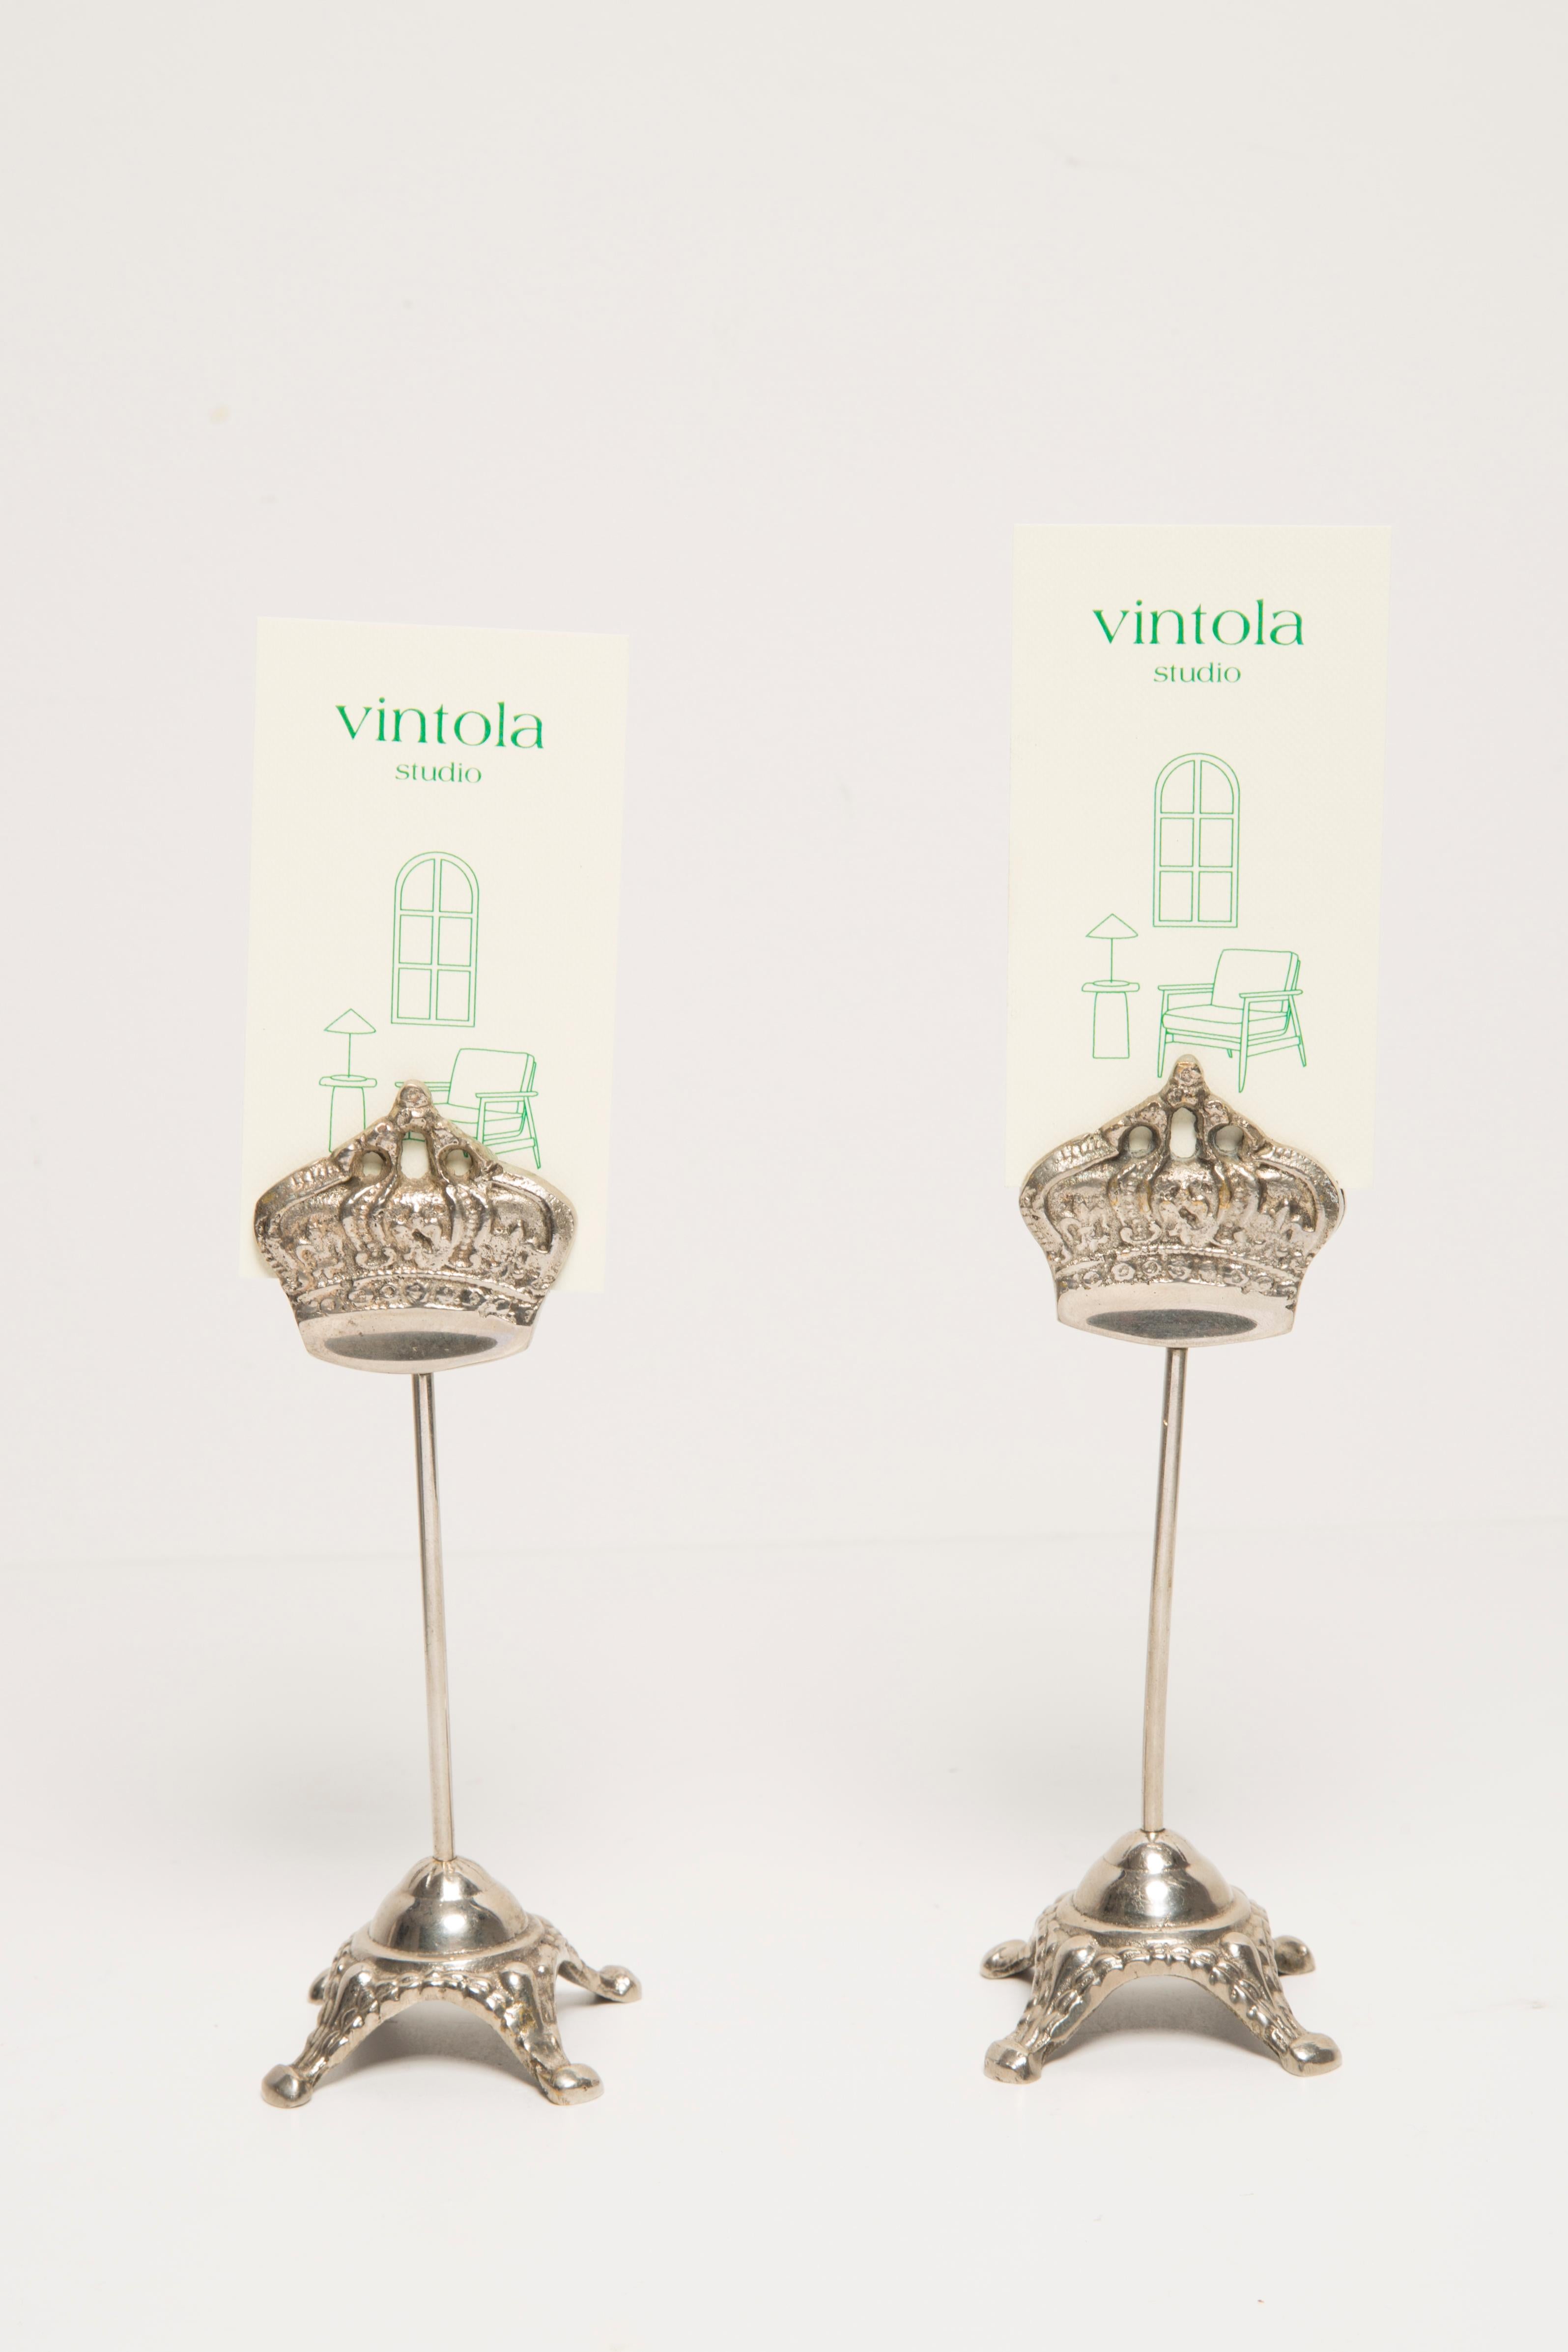 Stunning mid-century silver / gilt / gilded Hollywood Regency style visit card stands / holder. Made in Florence, Italy, circa 1960. Good original vintage condition. Only one unique piece.